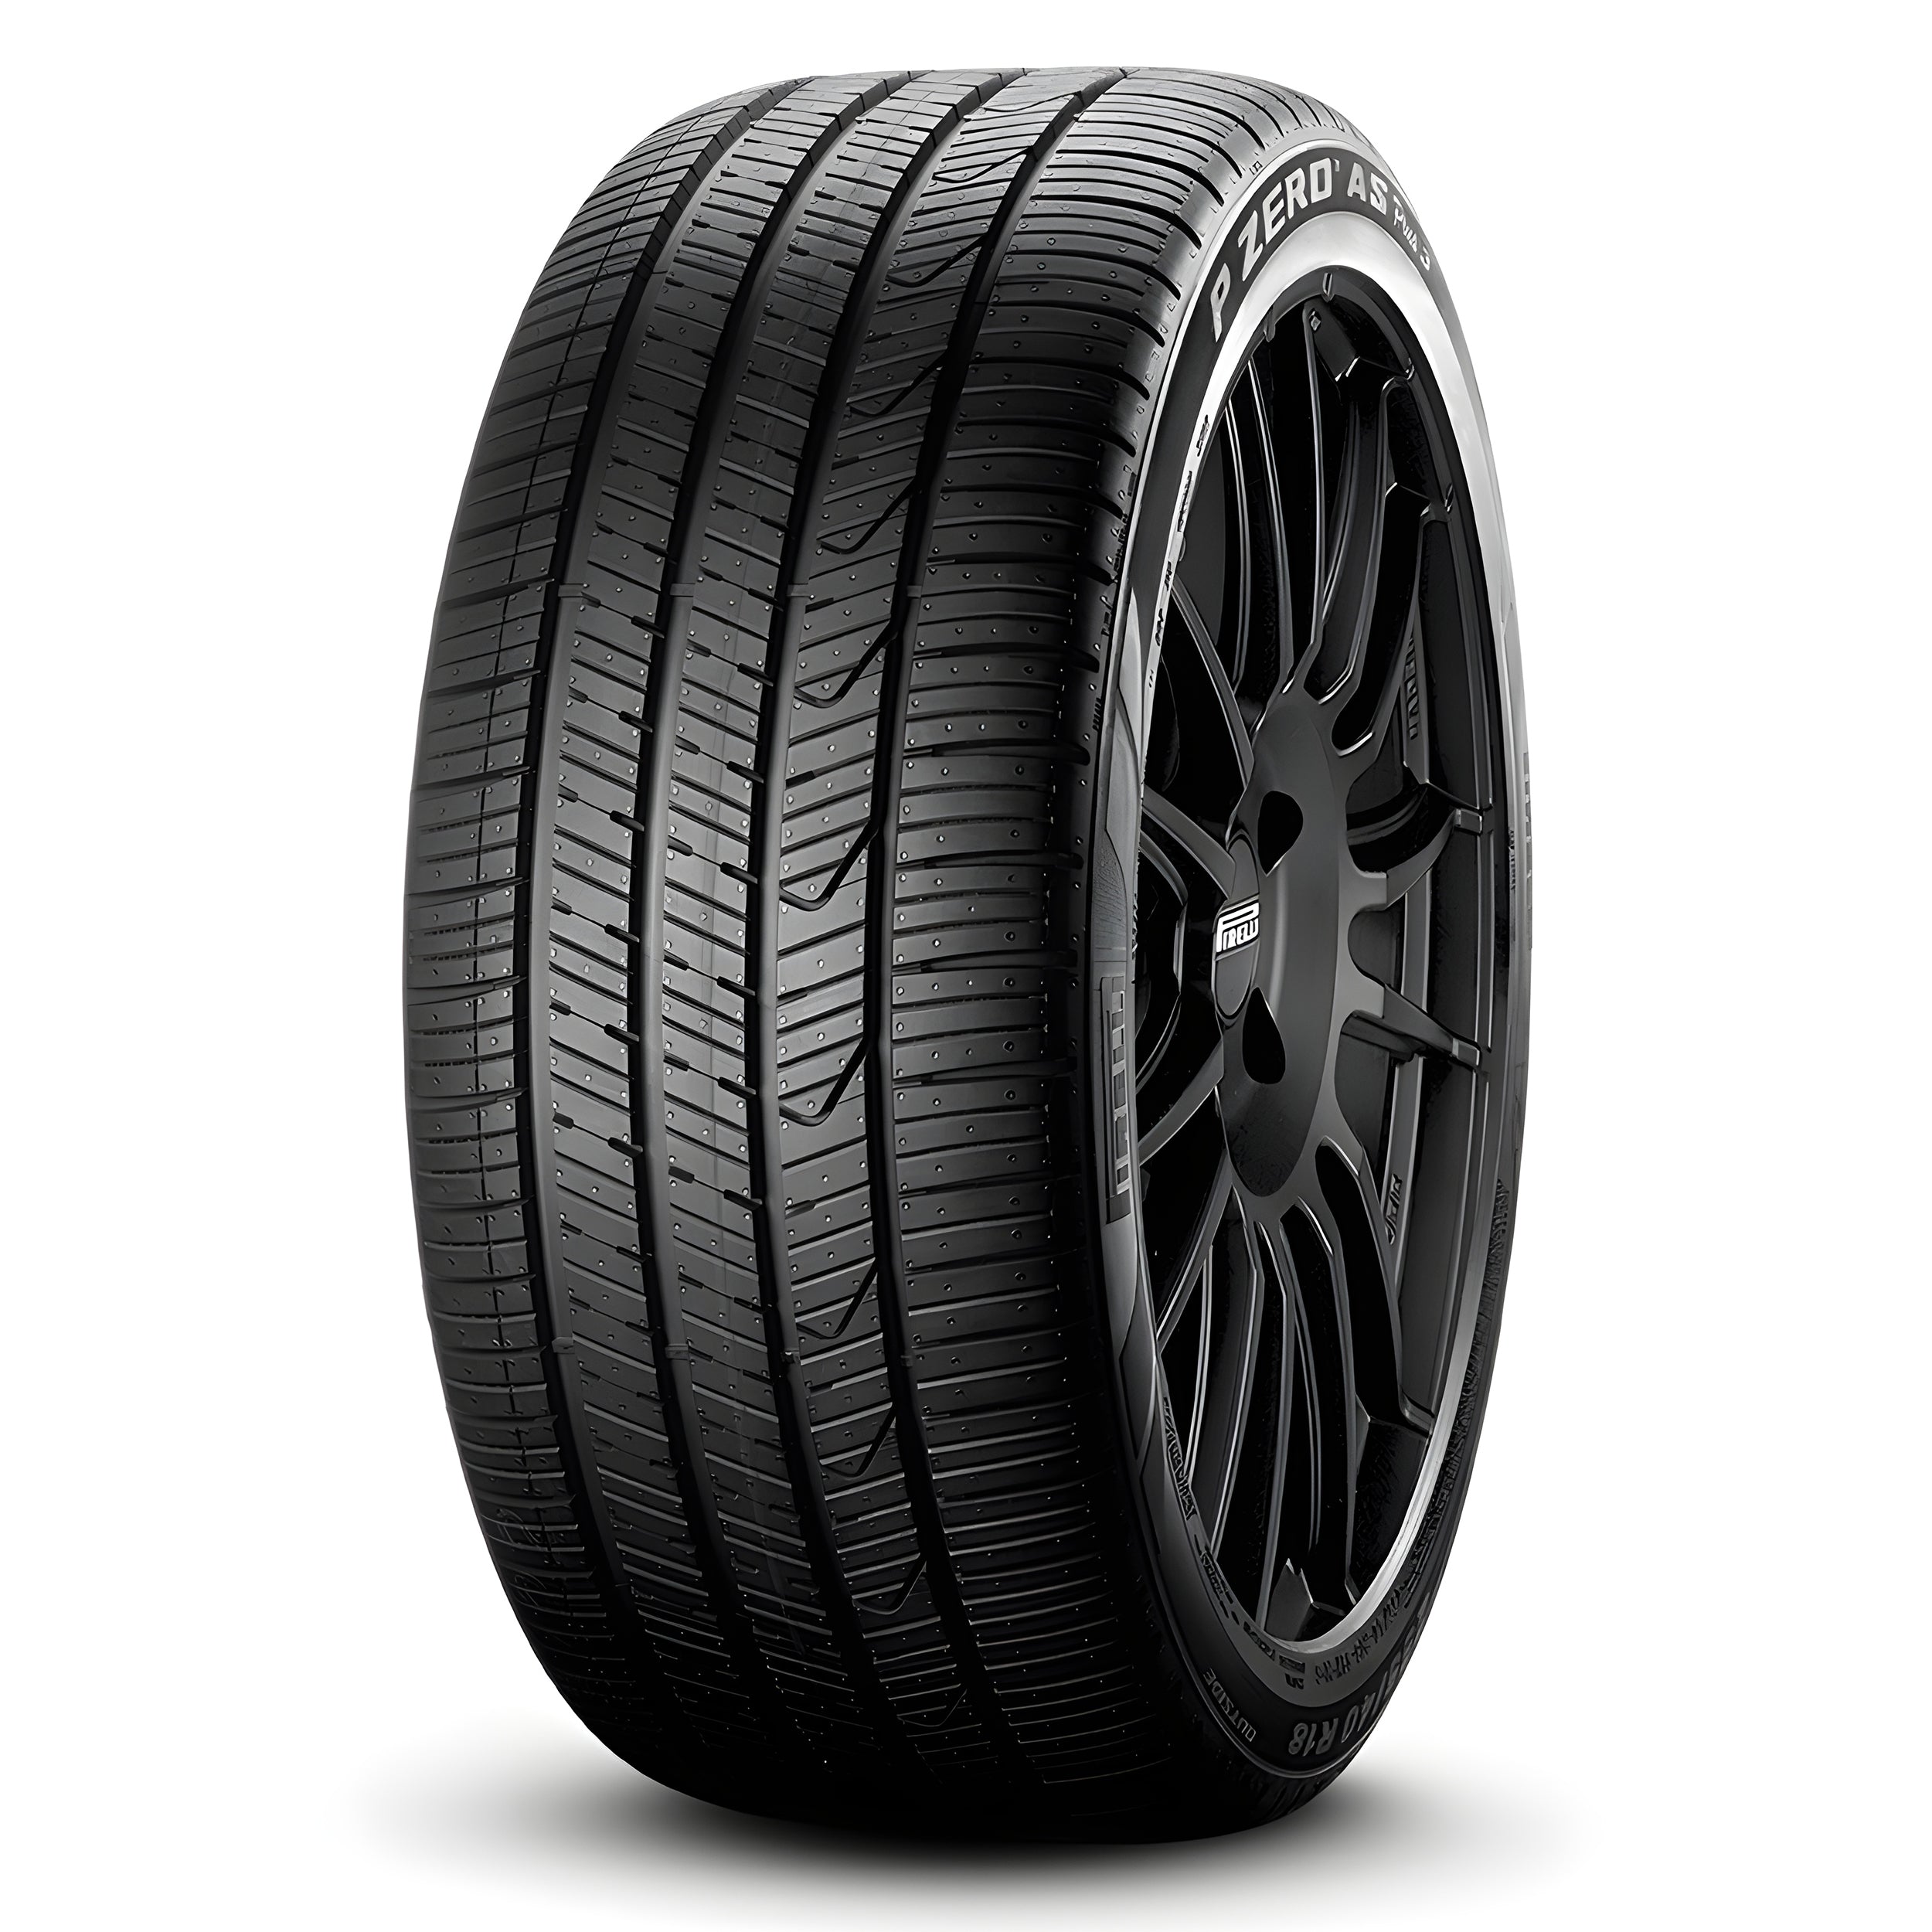 ⚡️You can find Pirelli P Zero AS Plus 3 255/40R19 100Y XL here